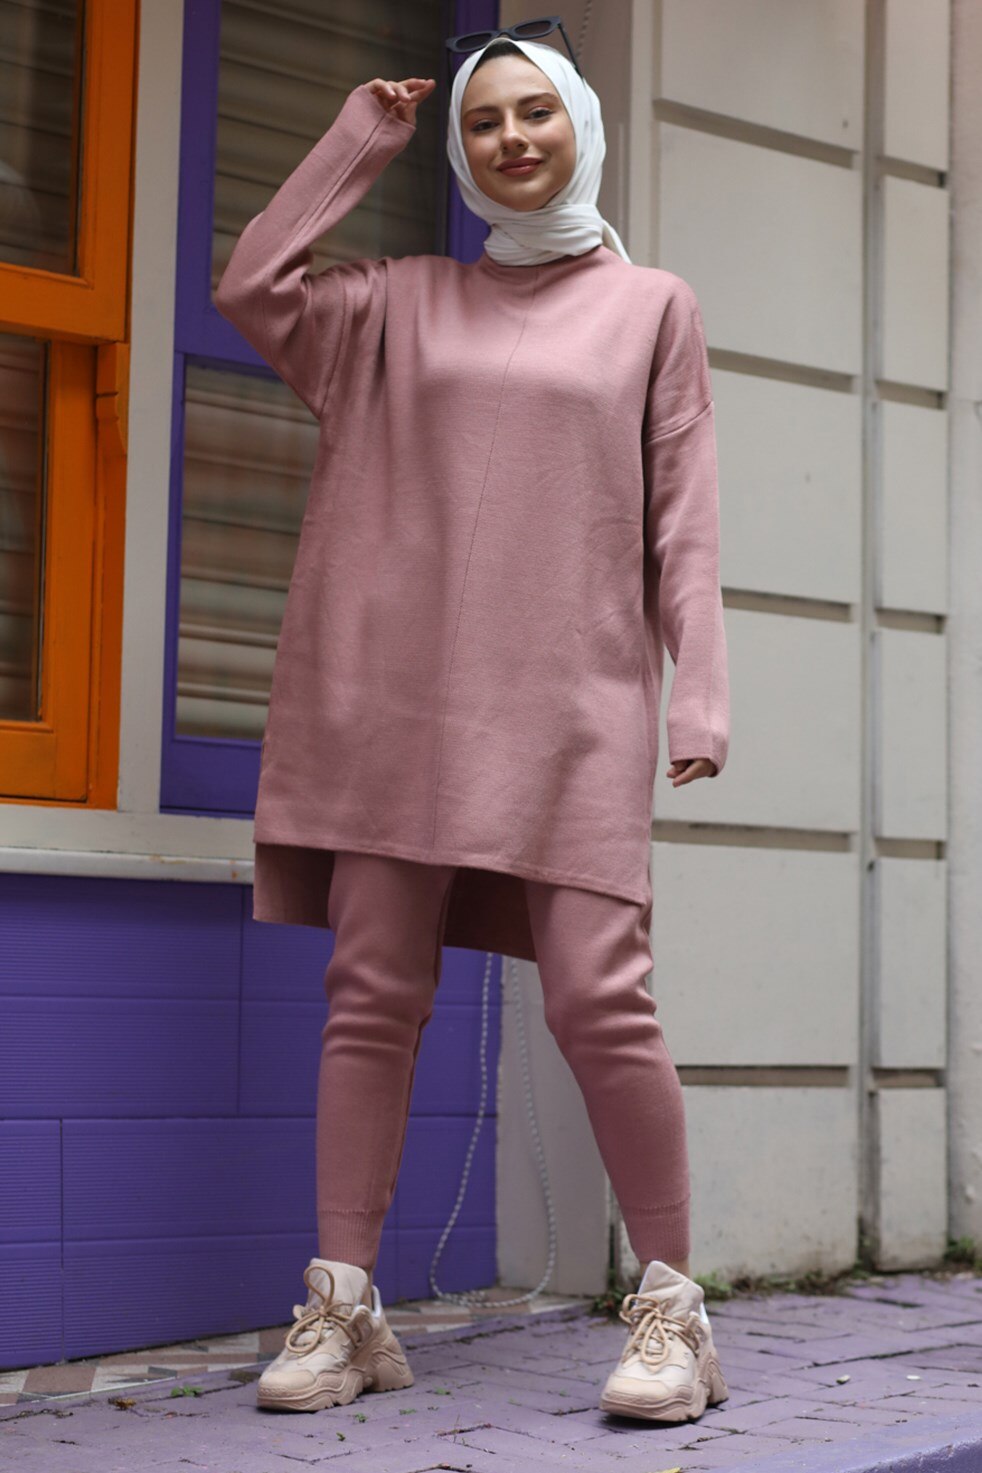 Modest Loungewear - Tight Joggers with Loose Sweatshirt - Pink